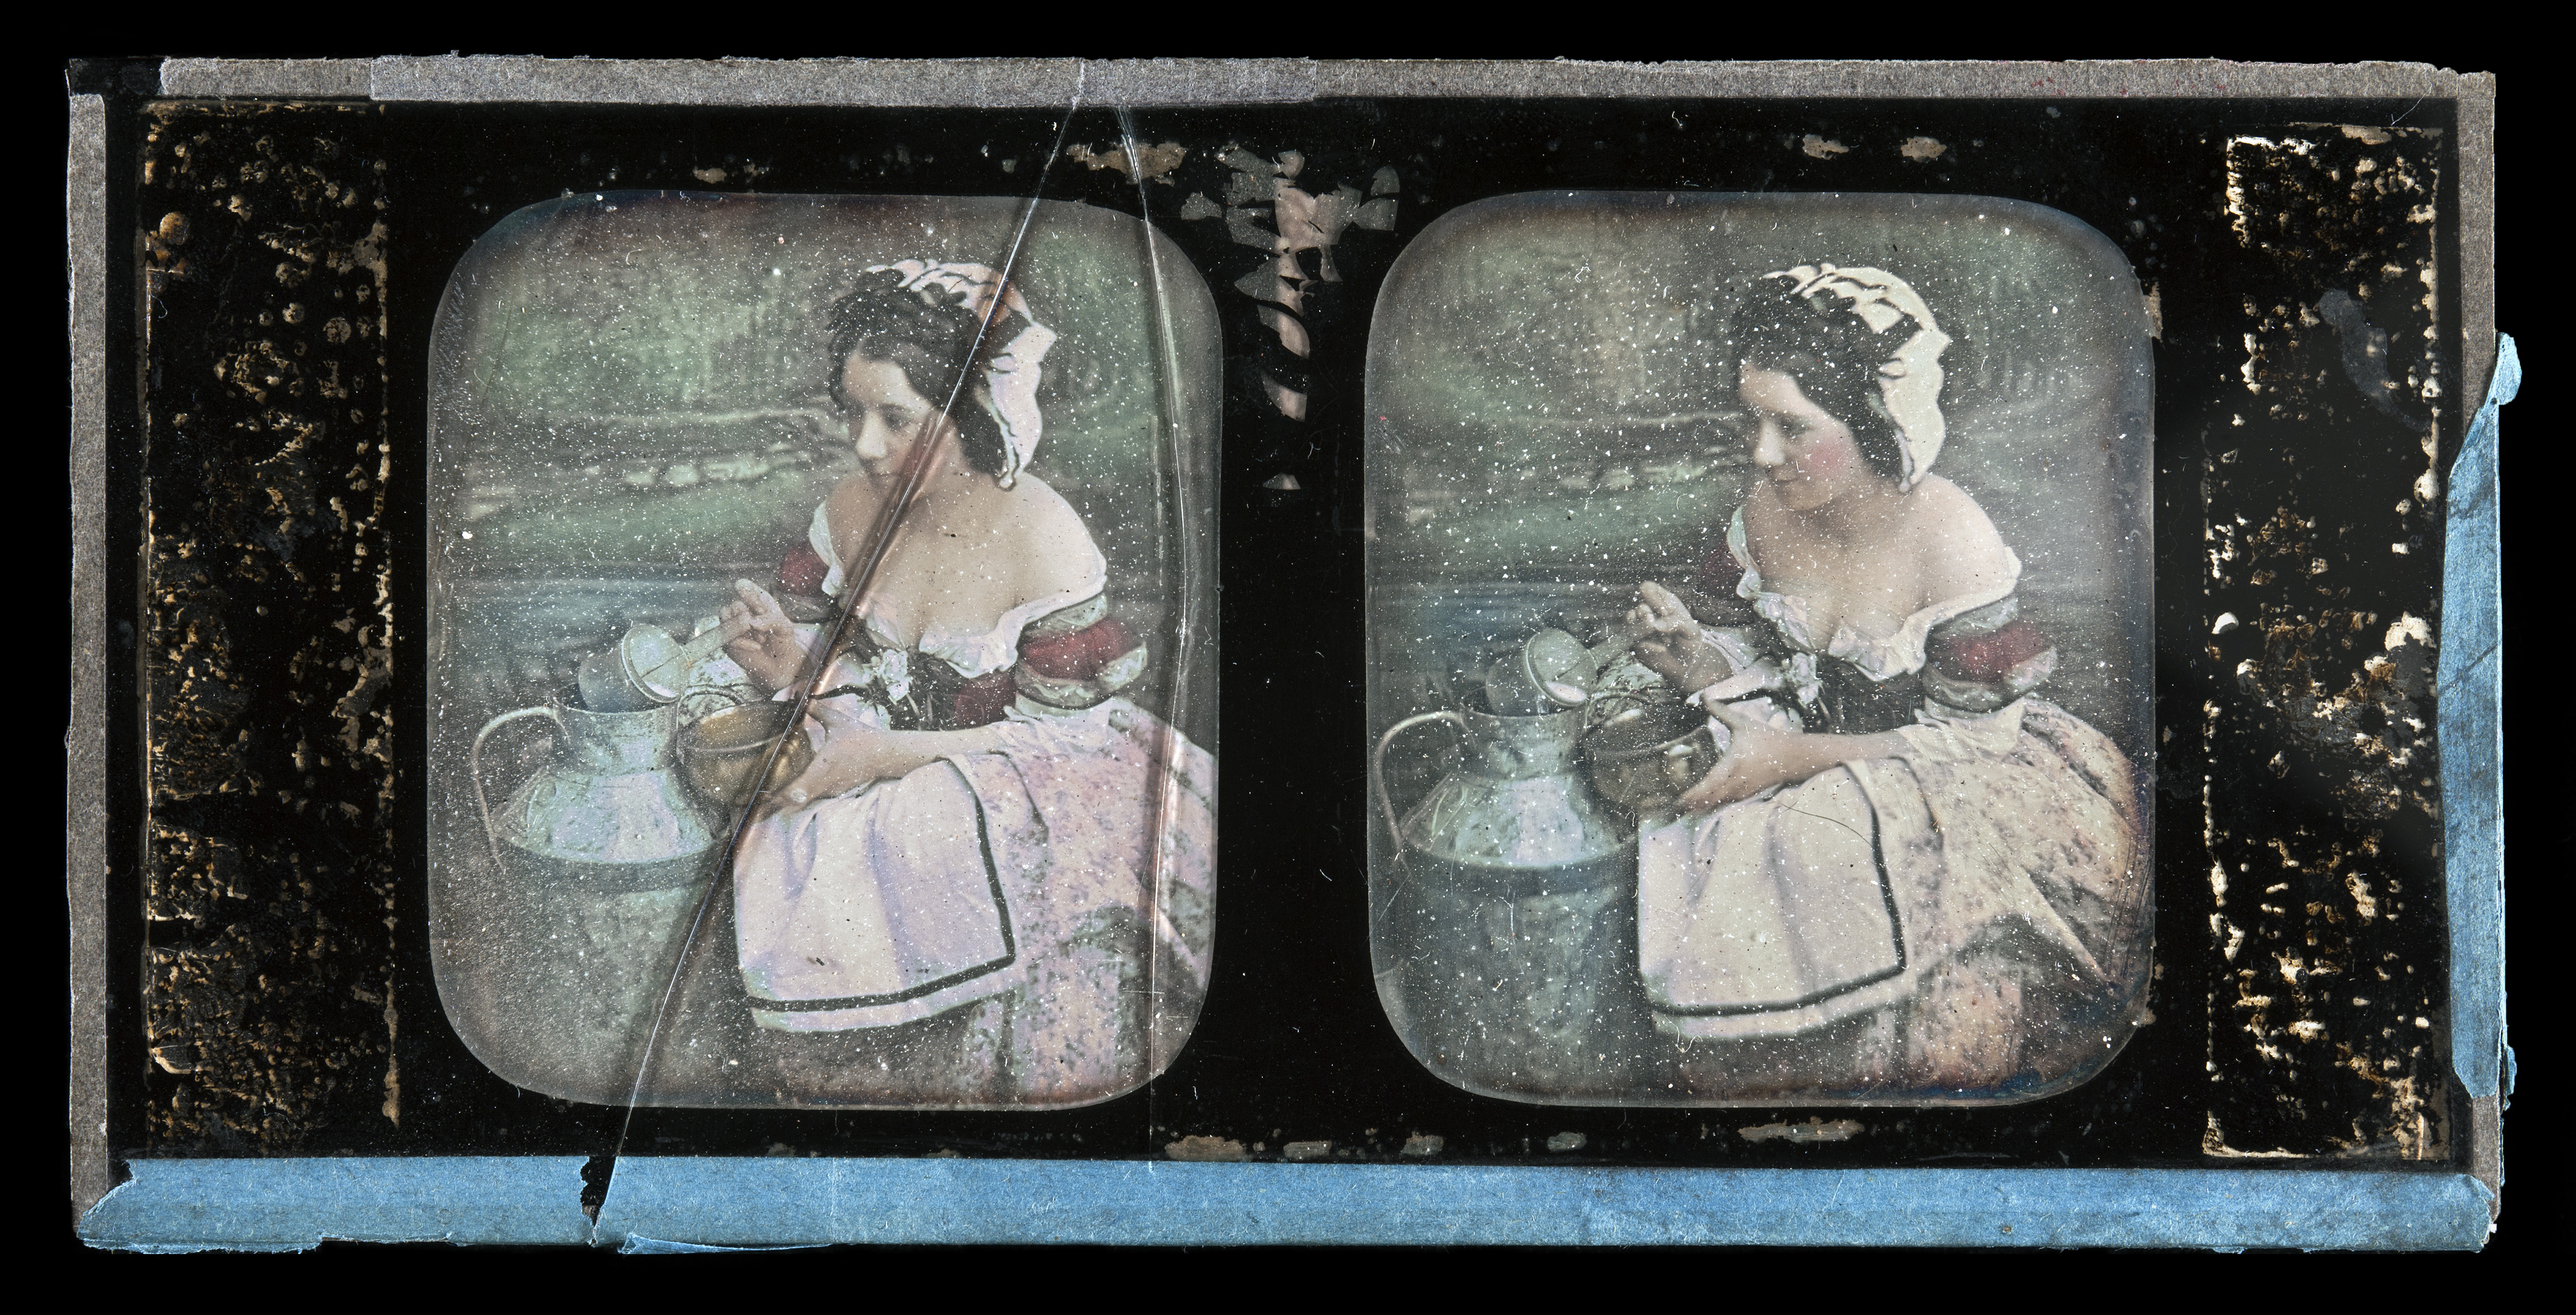 Finnish framed stereo image, daguerreotype. The girl is pouring milk into a bowl. 1850s | src Helsinki Photos